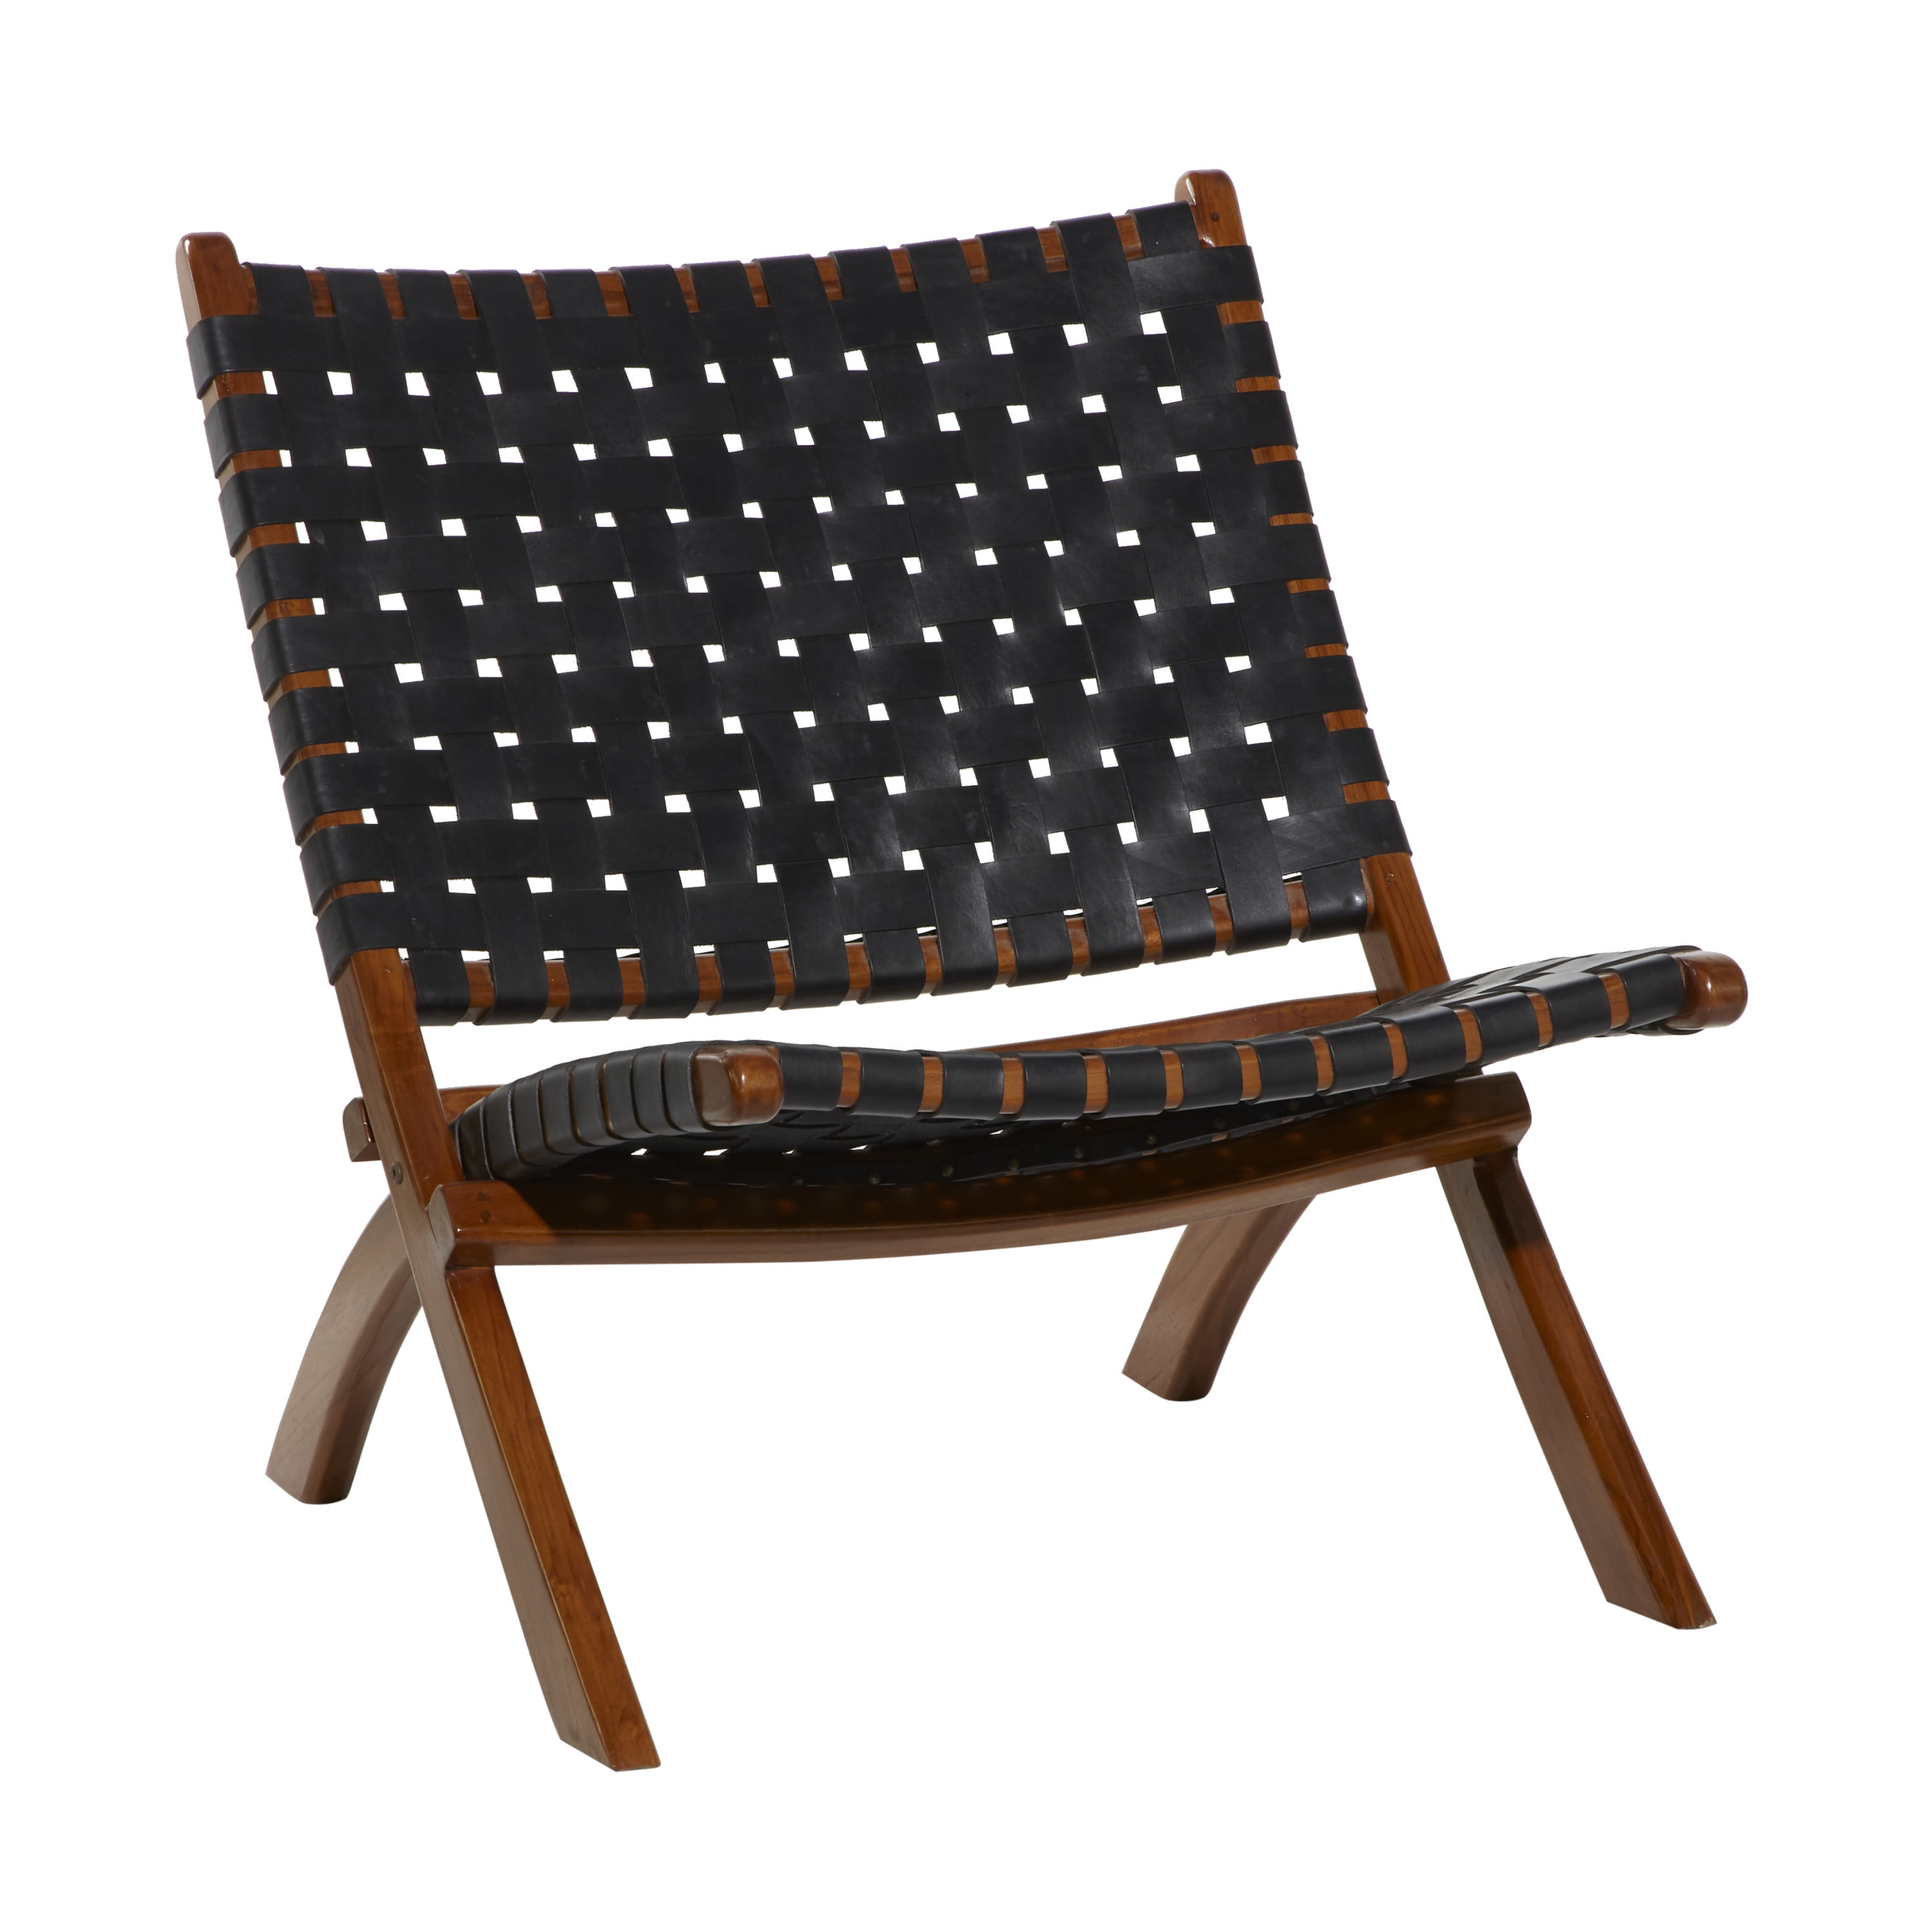 DecMode Leather Woven Folding Chair with Brown Wood Frame, Black